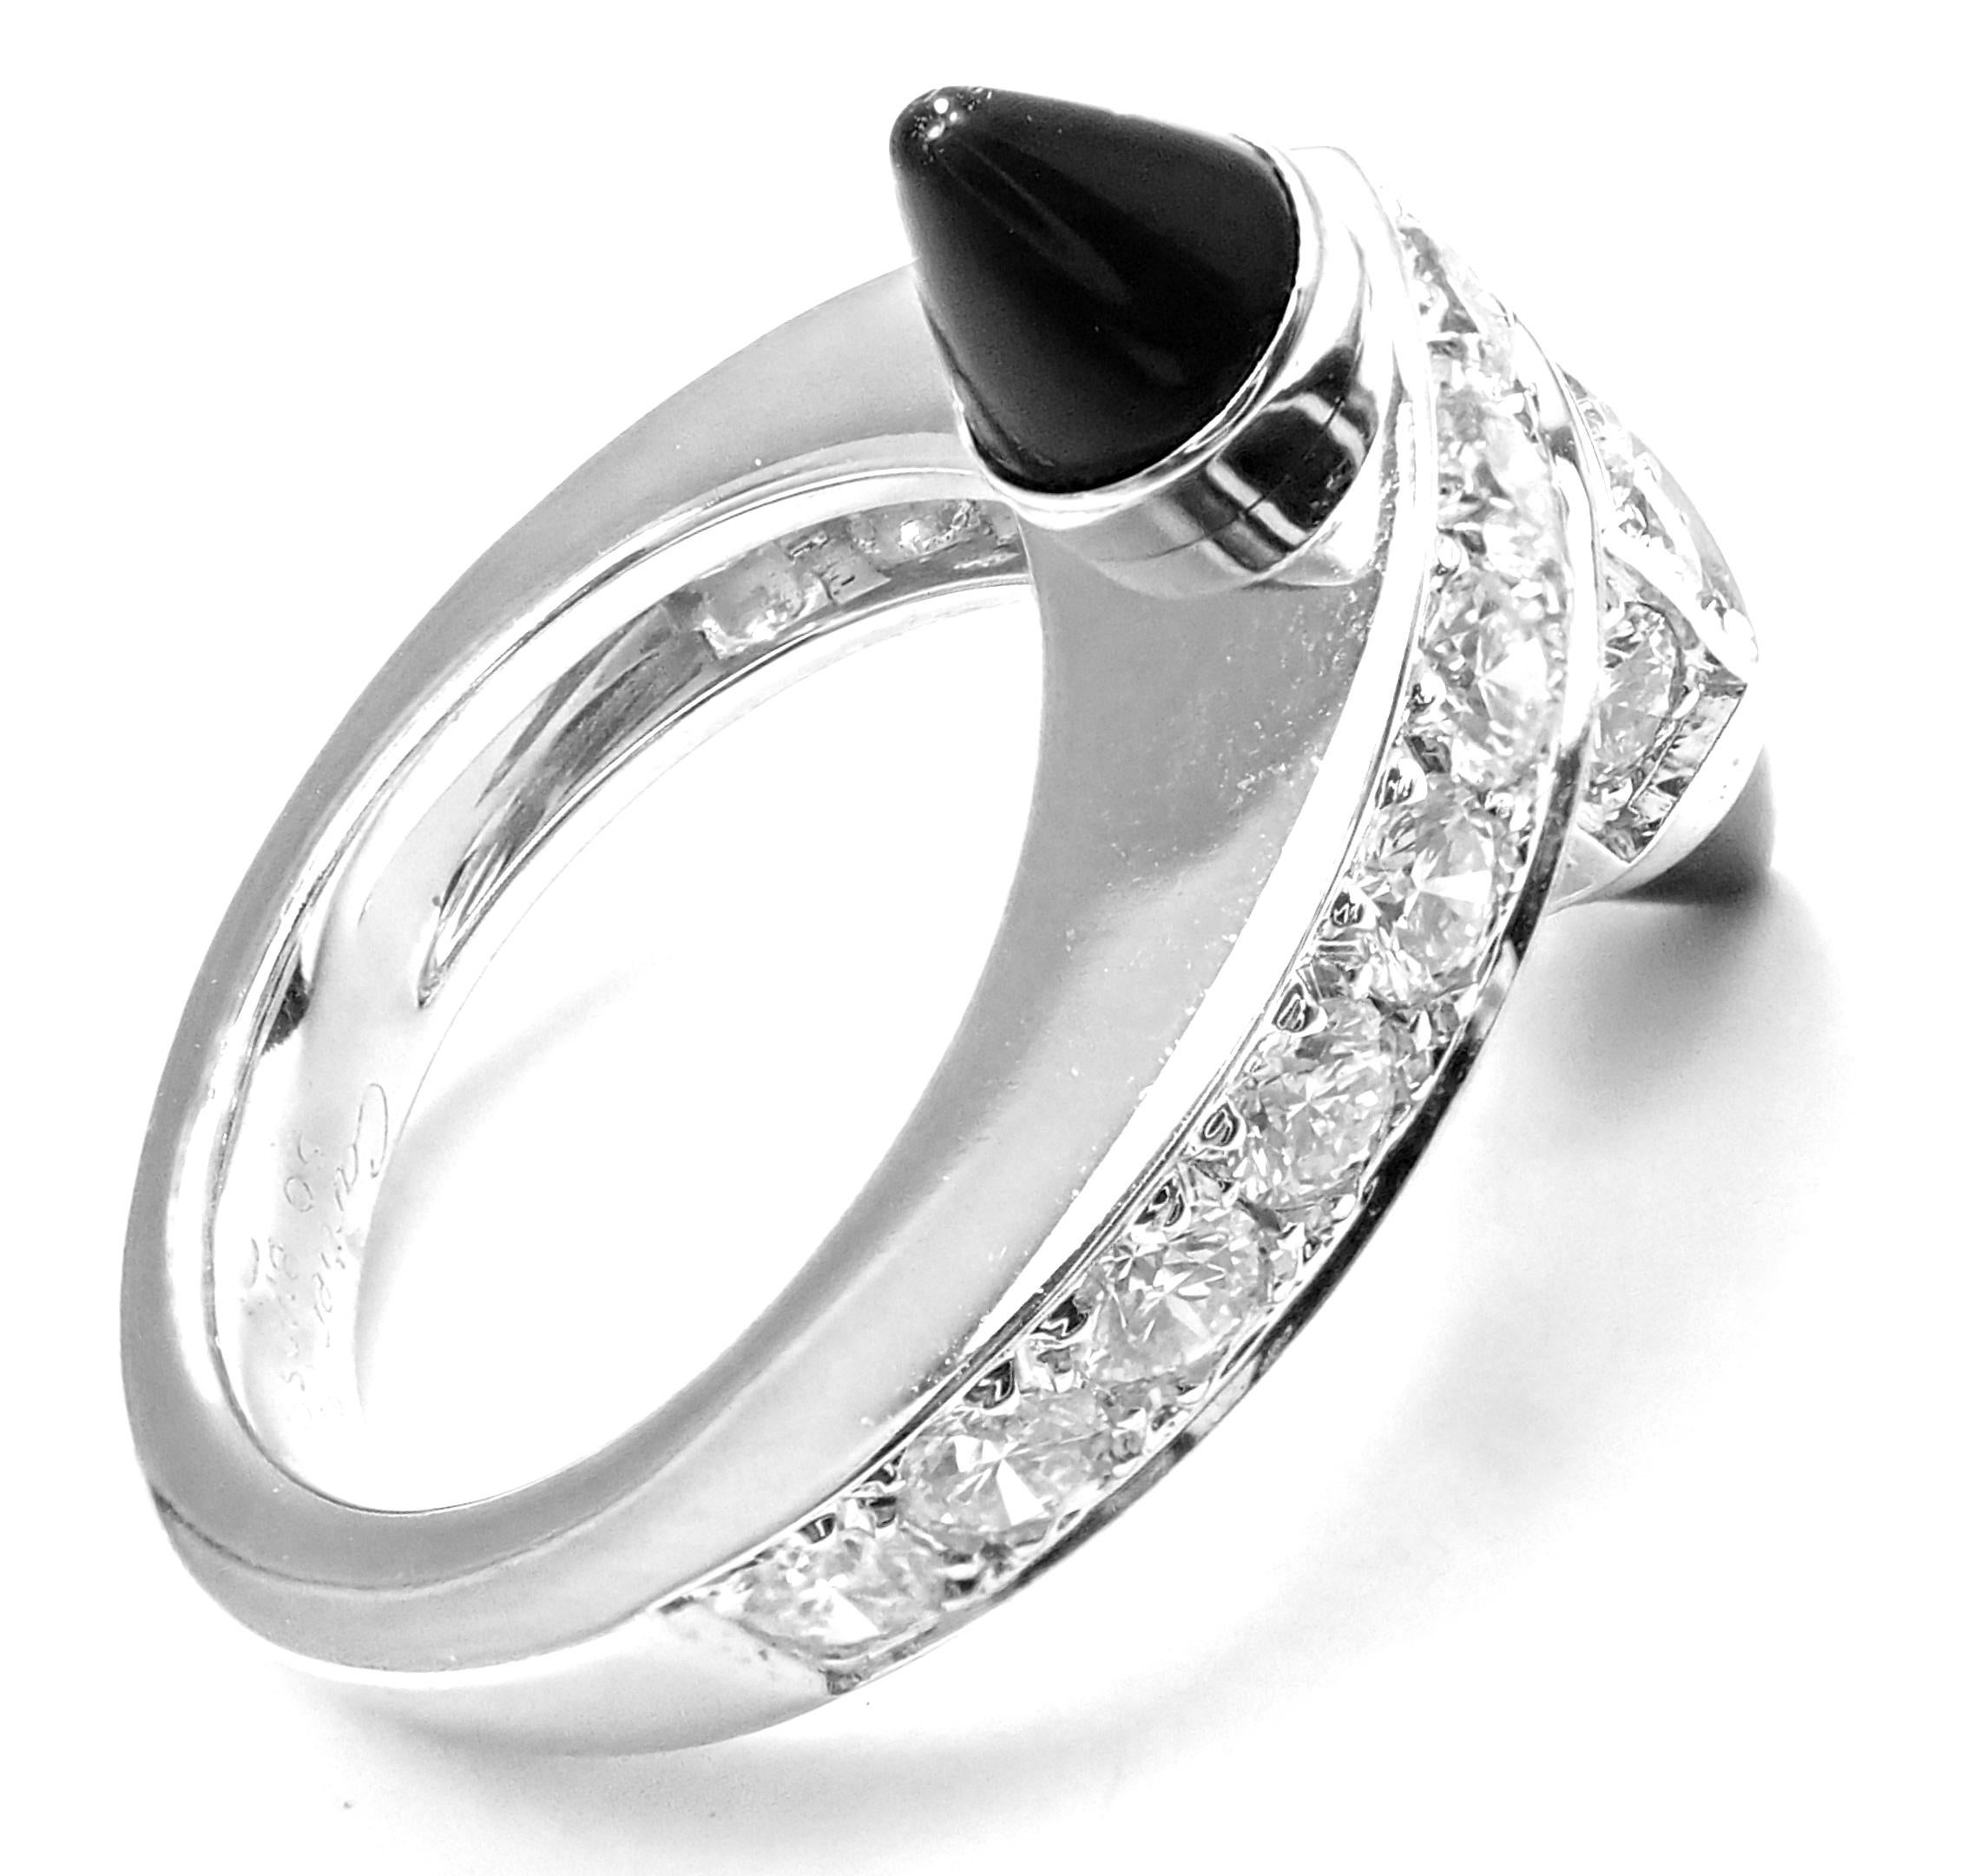 18k White Gold Diamond and Black Onyx Menotte Ring by Cartier.  
With 20 round brilliant cut diamonds VVS1 clarity, G color total weight approx. 1.5ct
2 Black Onyx Stones  
Details:  
Ring Size: European 50 US 5 1/4
Weight: 10.4 grams
Width: